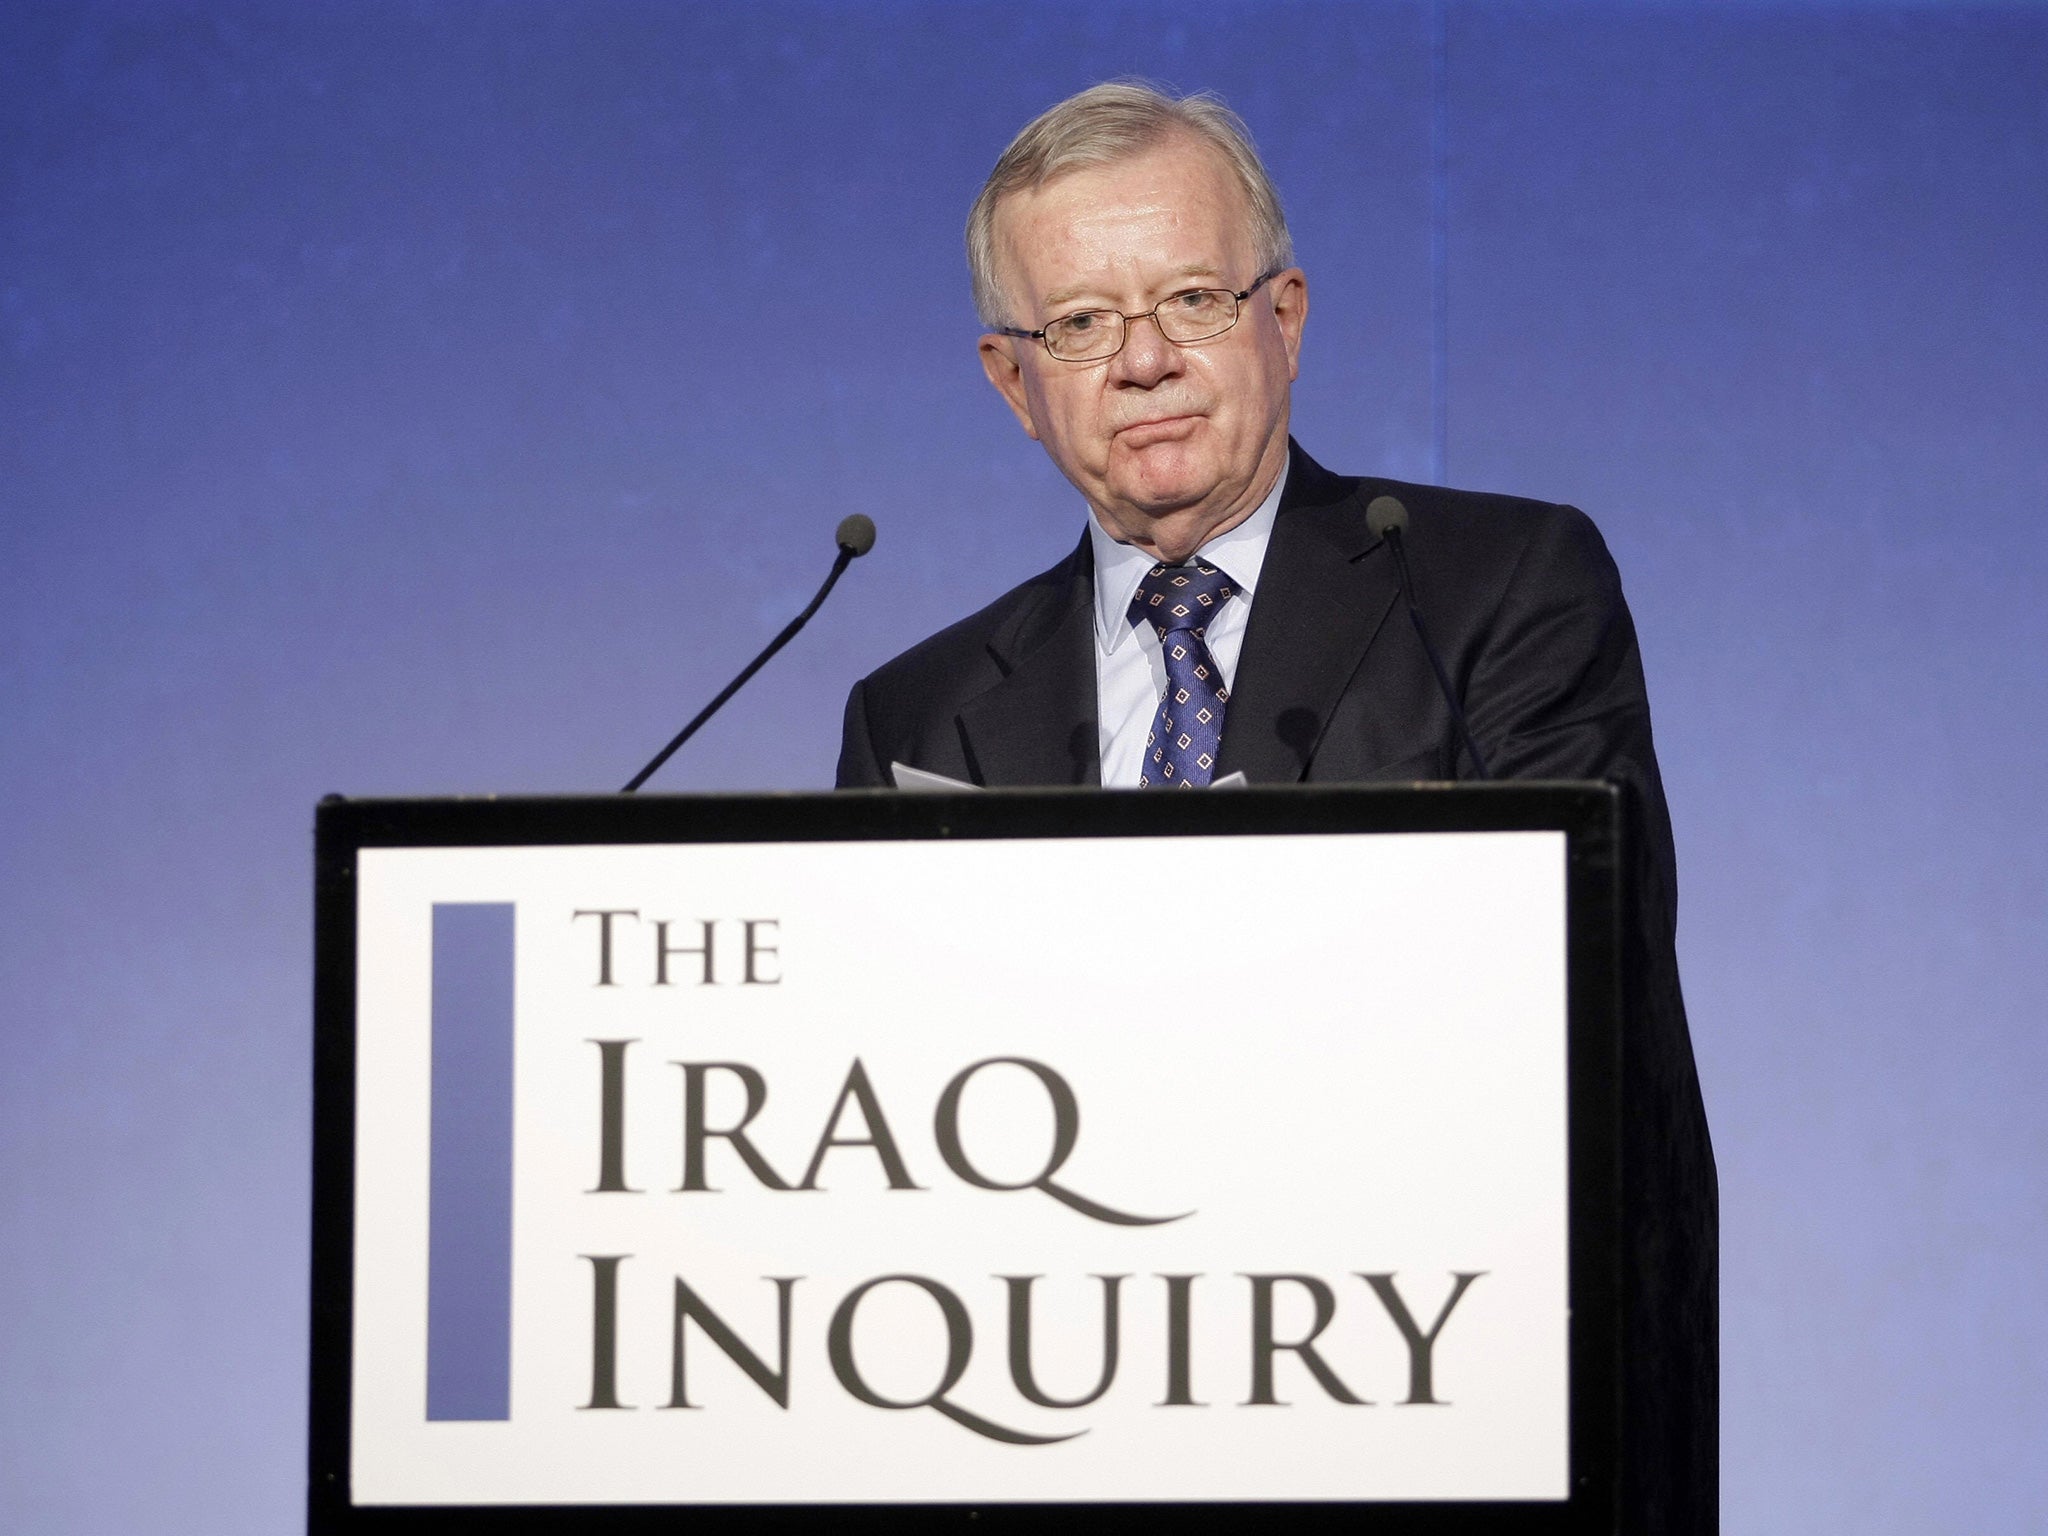 Sir John Chilcot has said that he expects the report to be published in June or July next year